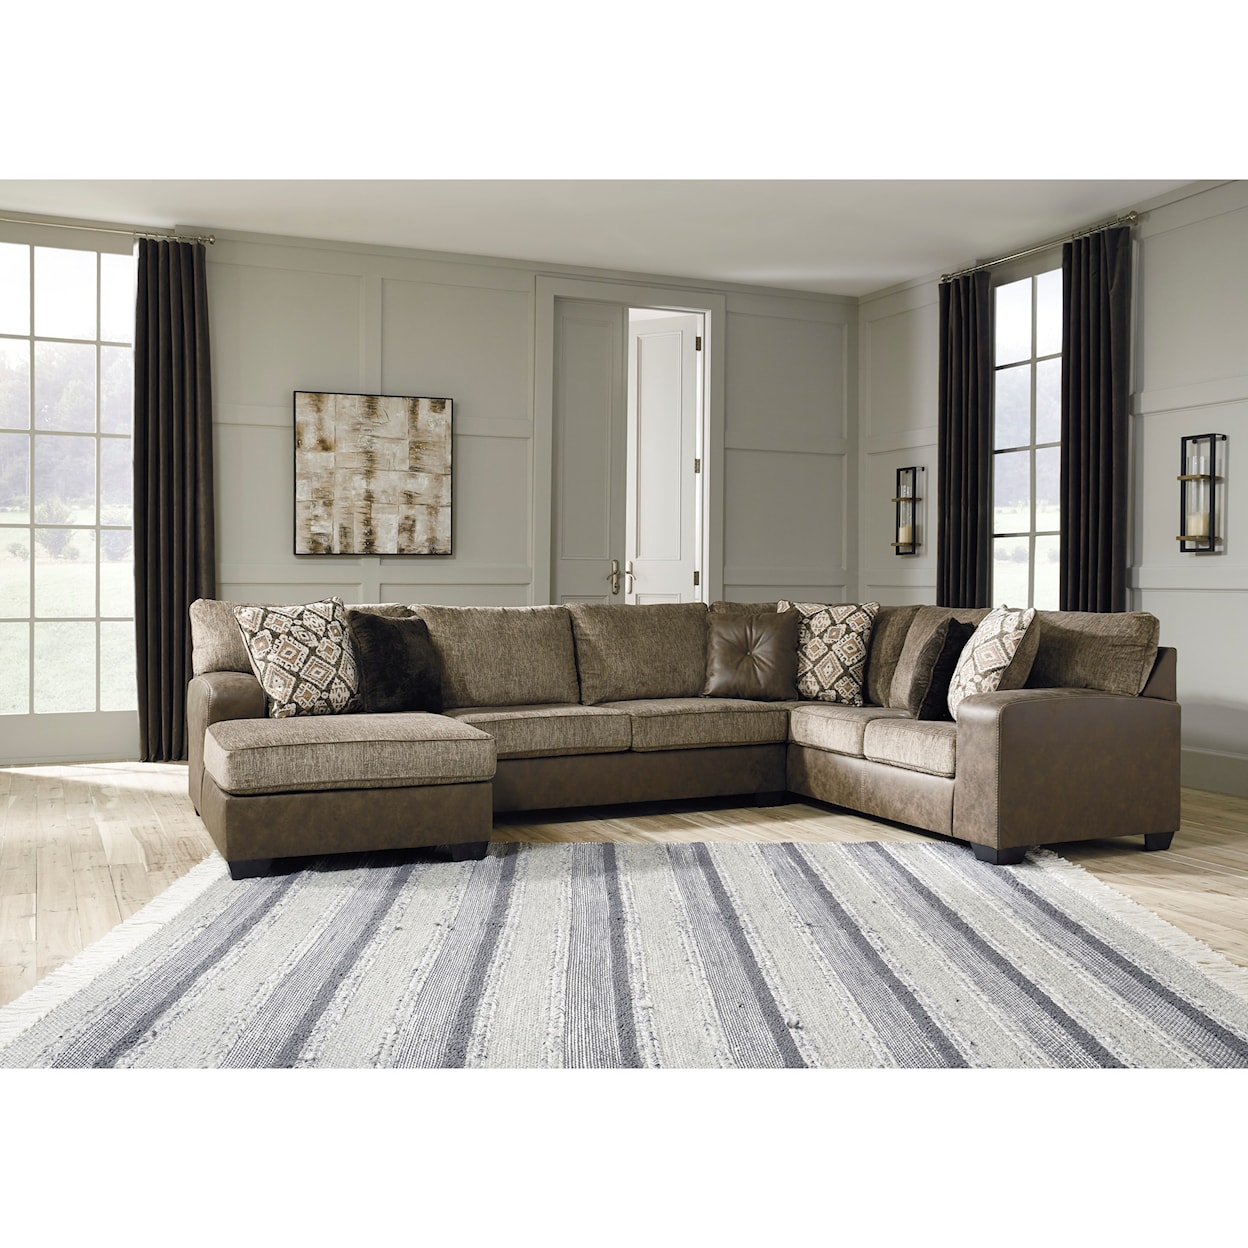 Ashley Furniture Benchcraft Abalone 3-Piece Sectional